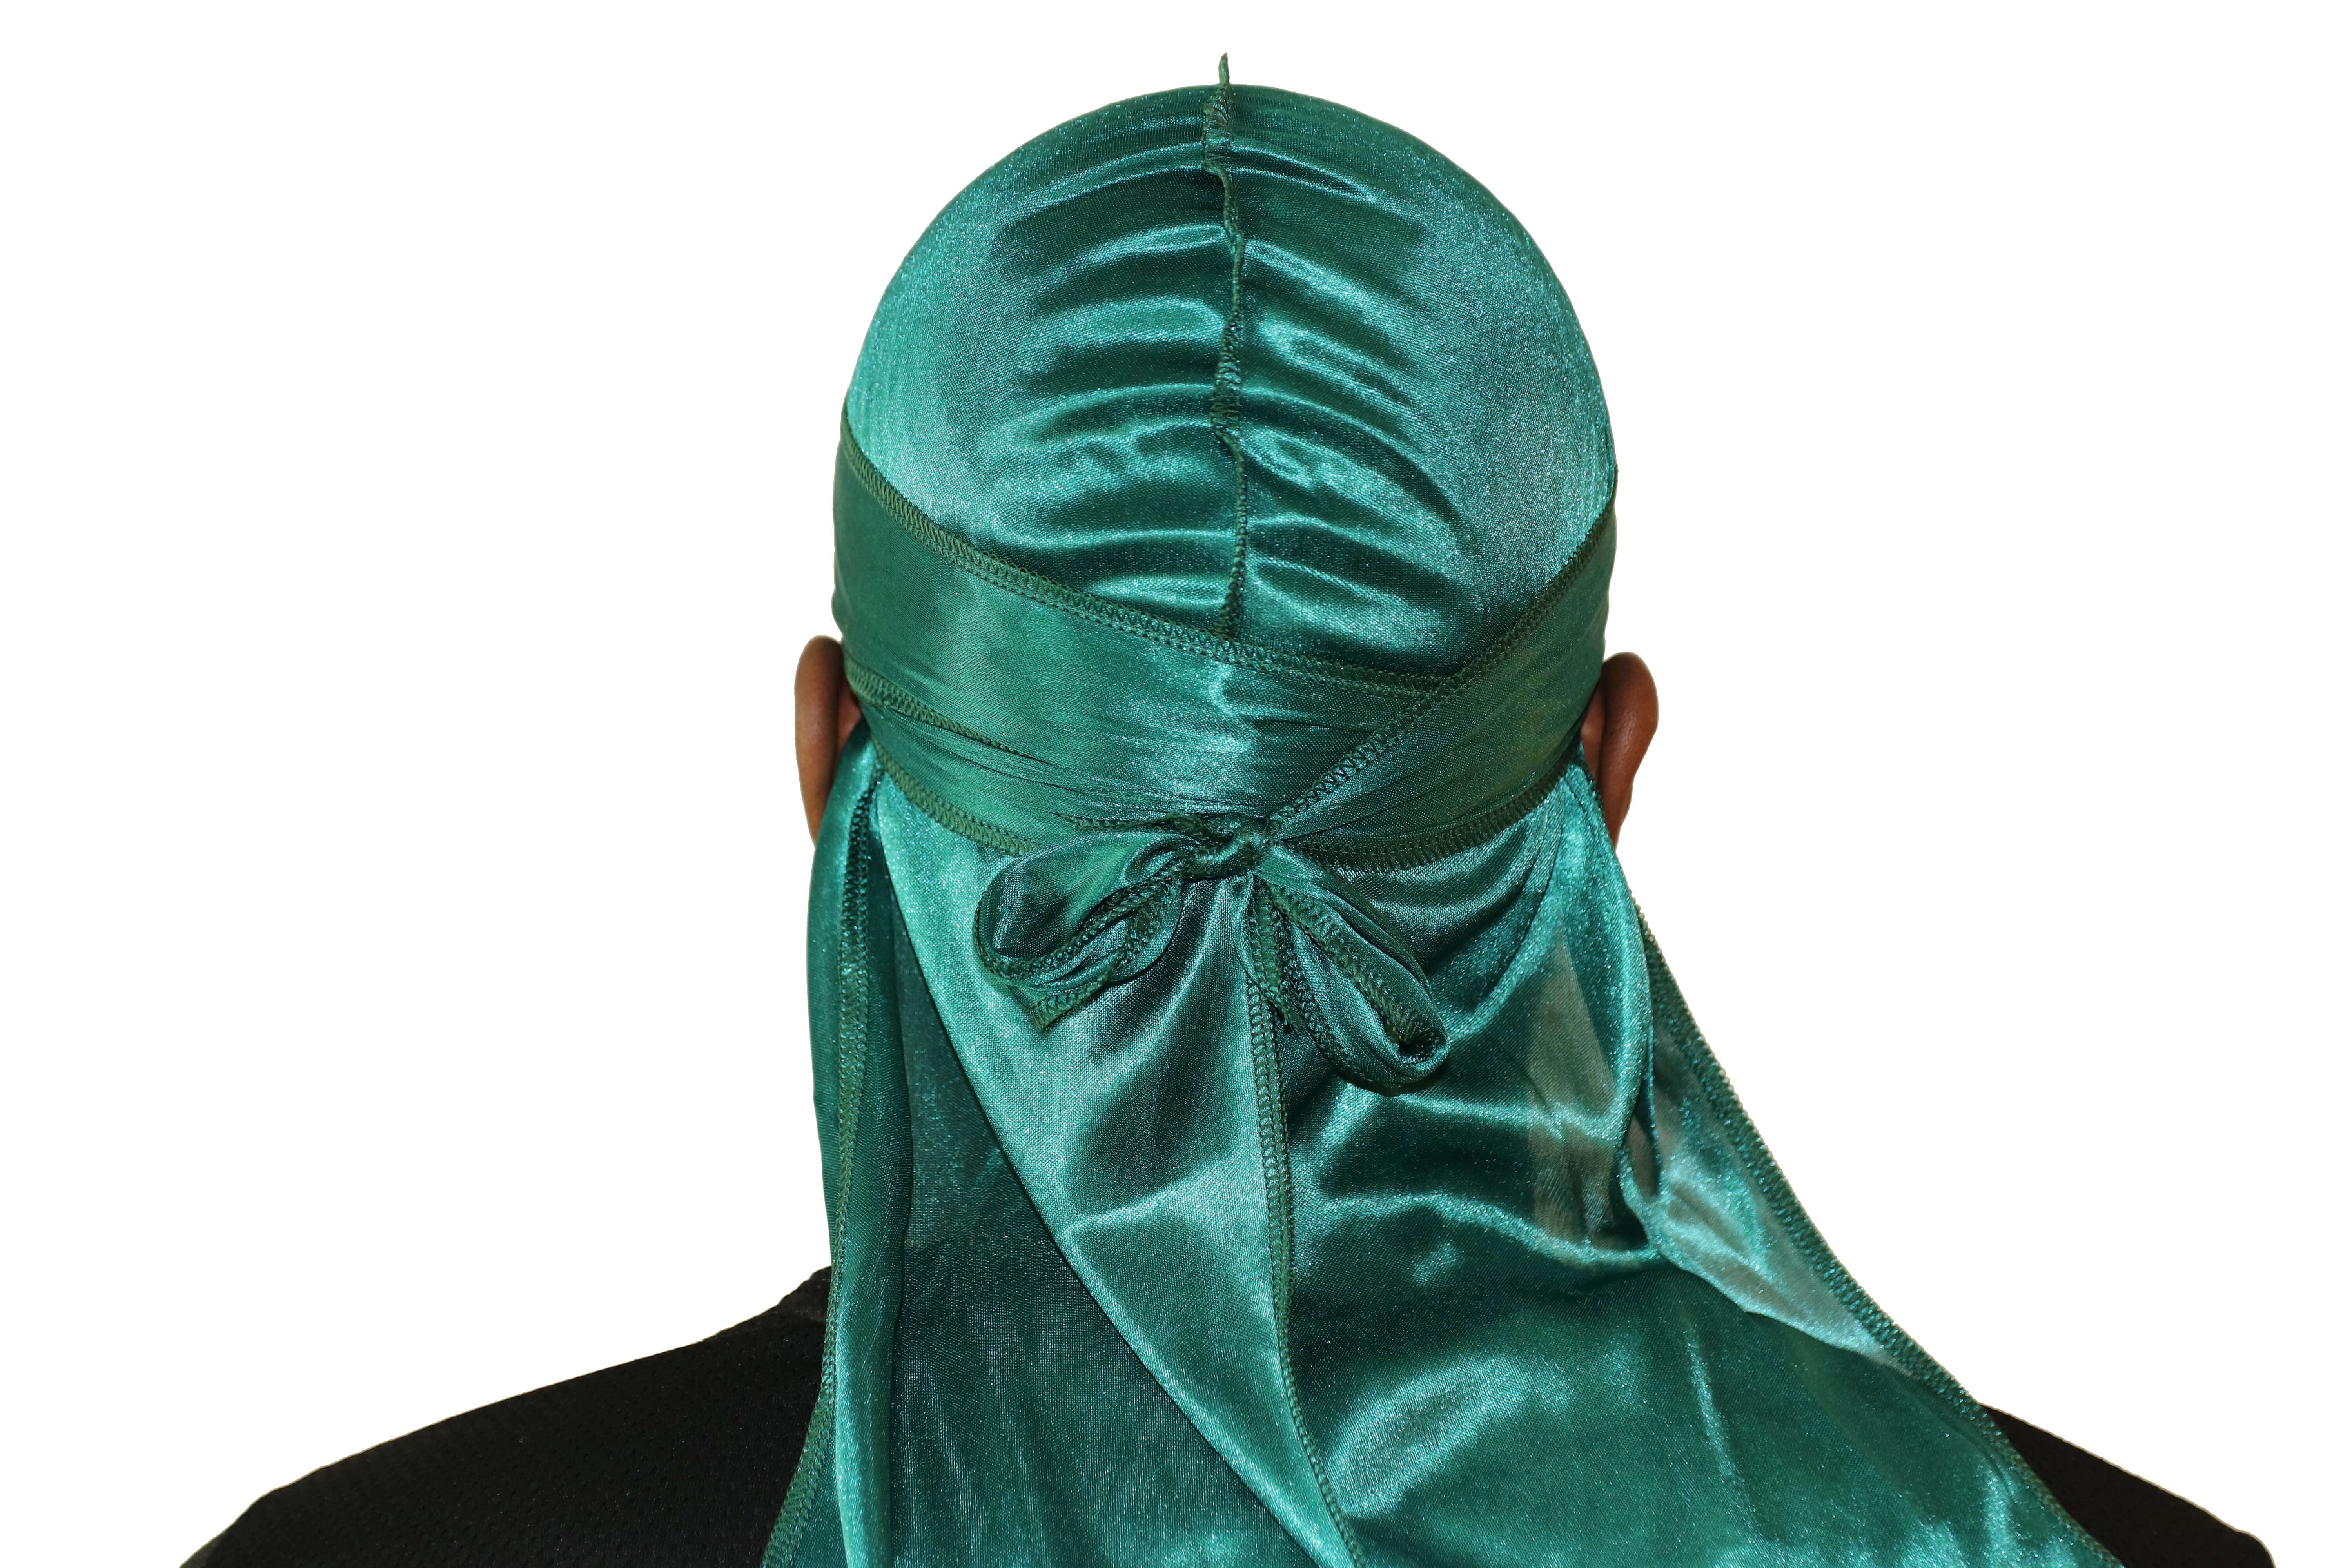 Wave Pro Durags, Silky $GREEN LV Durag